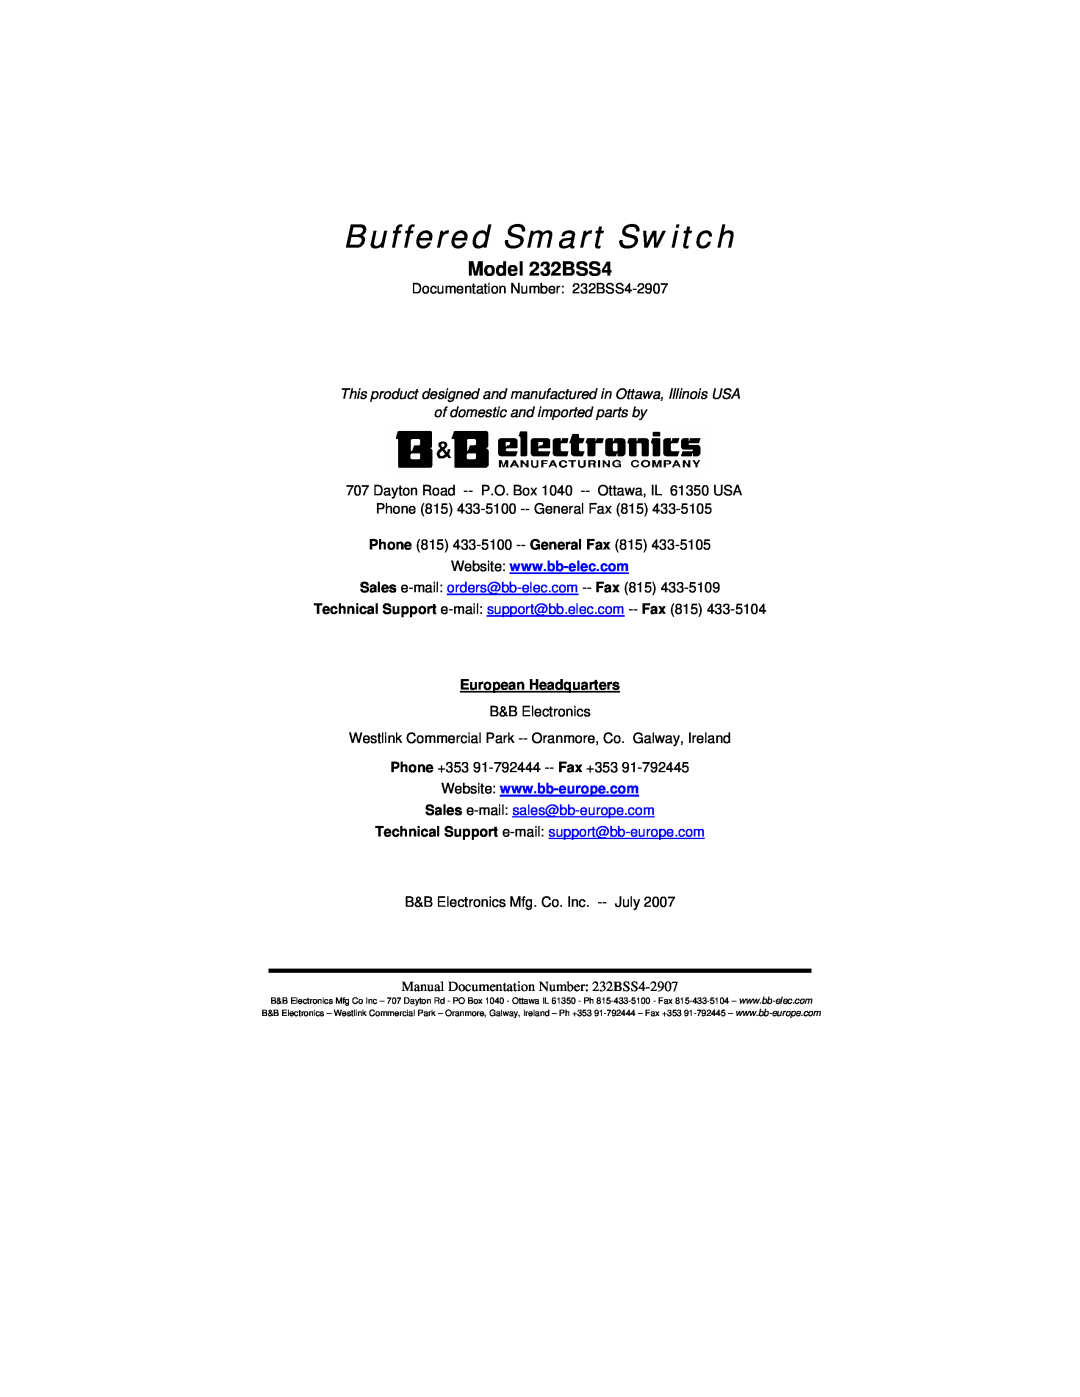 B&B Electronics manual Buffered Smart Switch, Model 232BSS4, of domestic and imported parts by, European Headquarters 